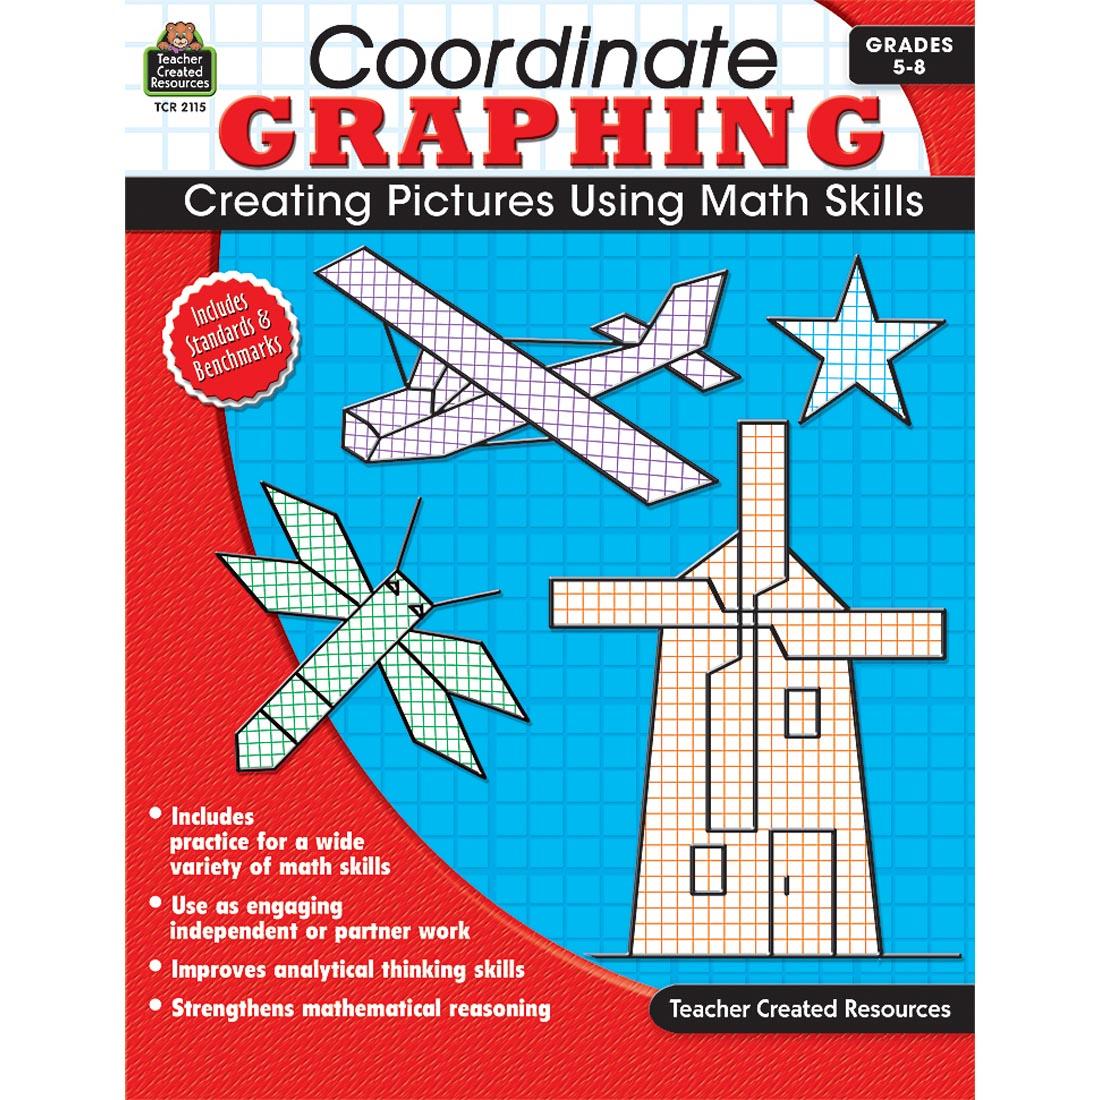 Coordinate Graphing Book Creating Pictures Using Math Skills